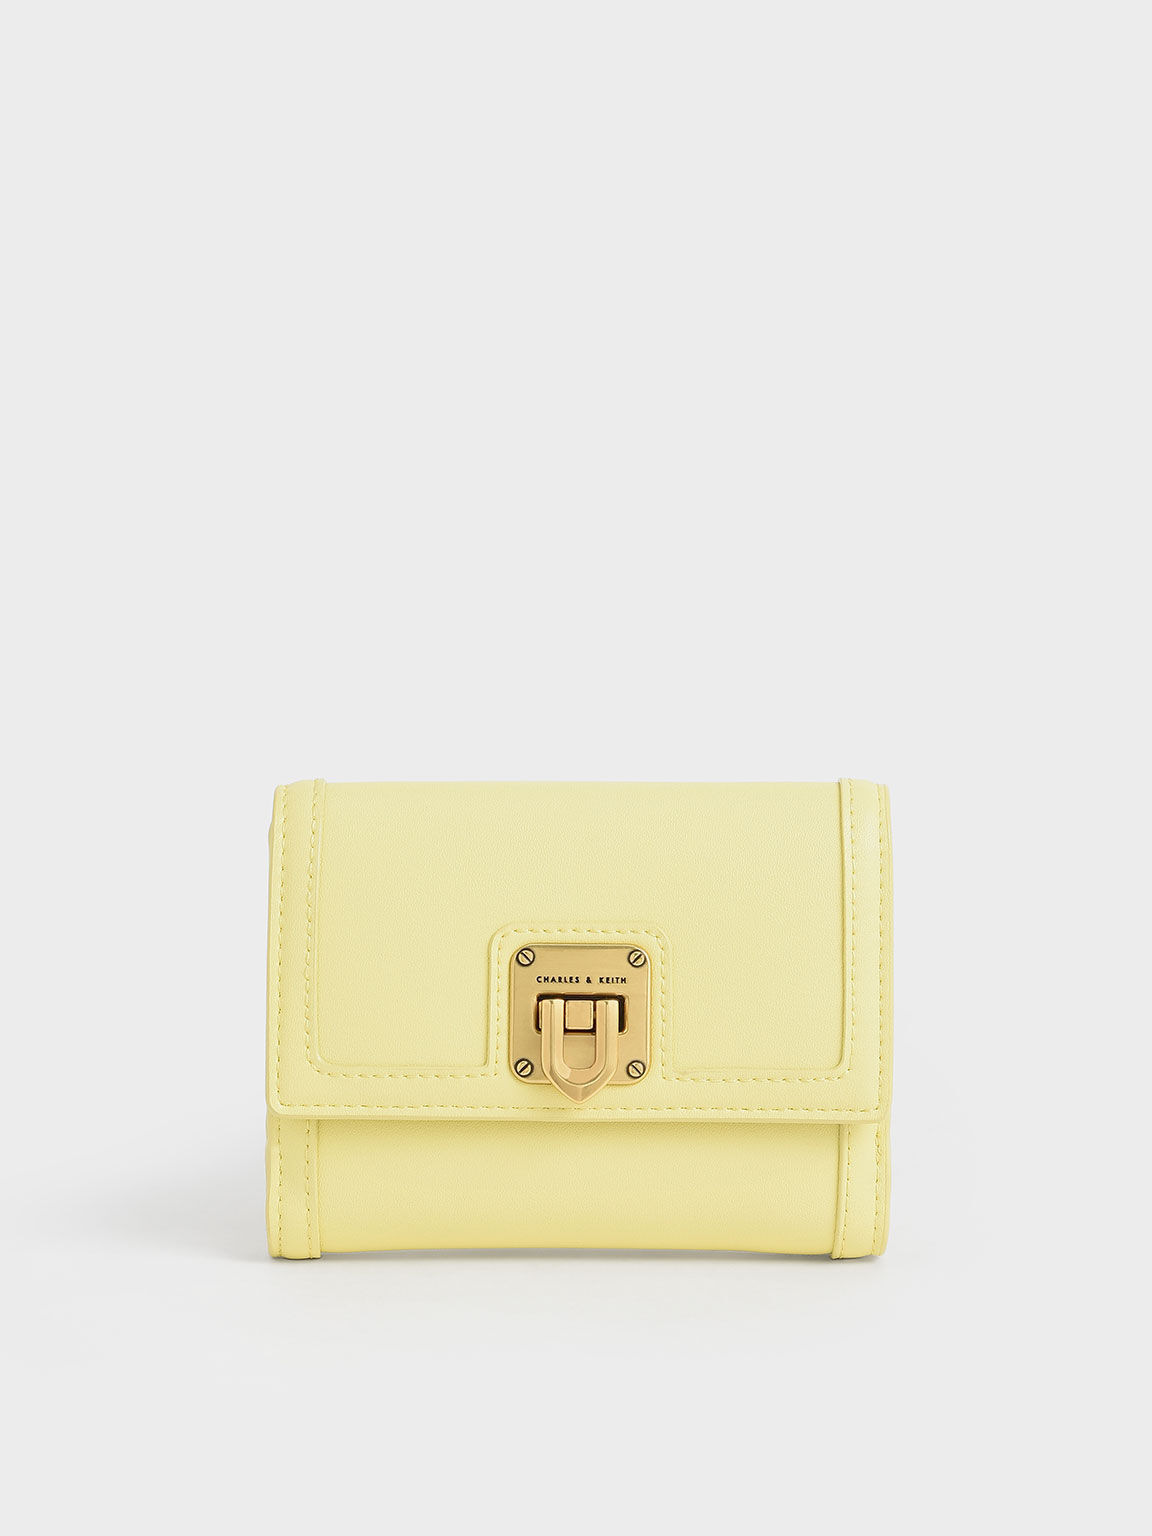 Charles & Keith butter yellow card holder